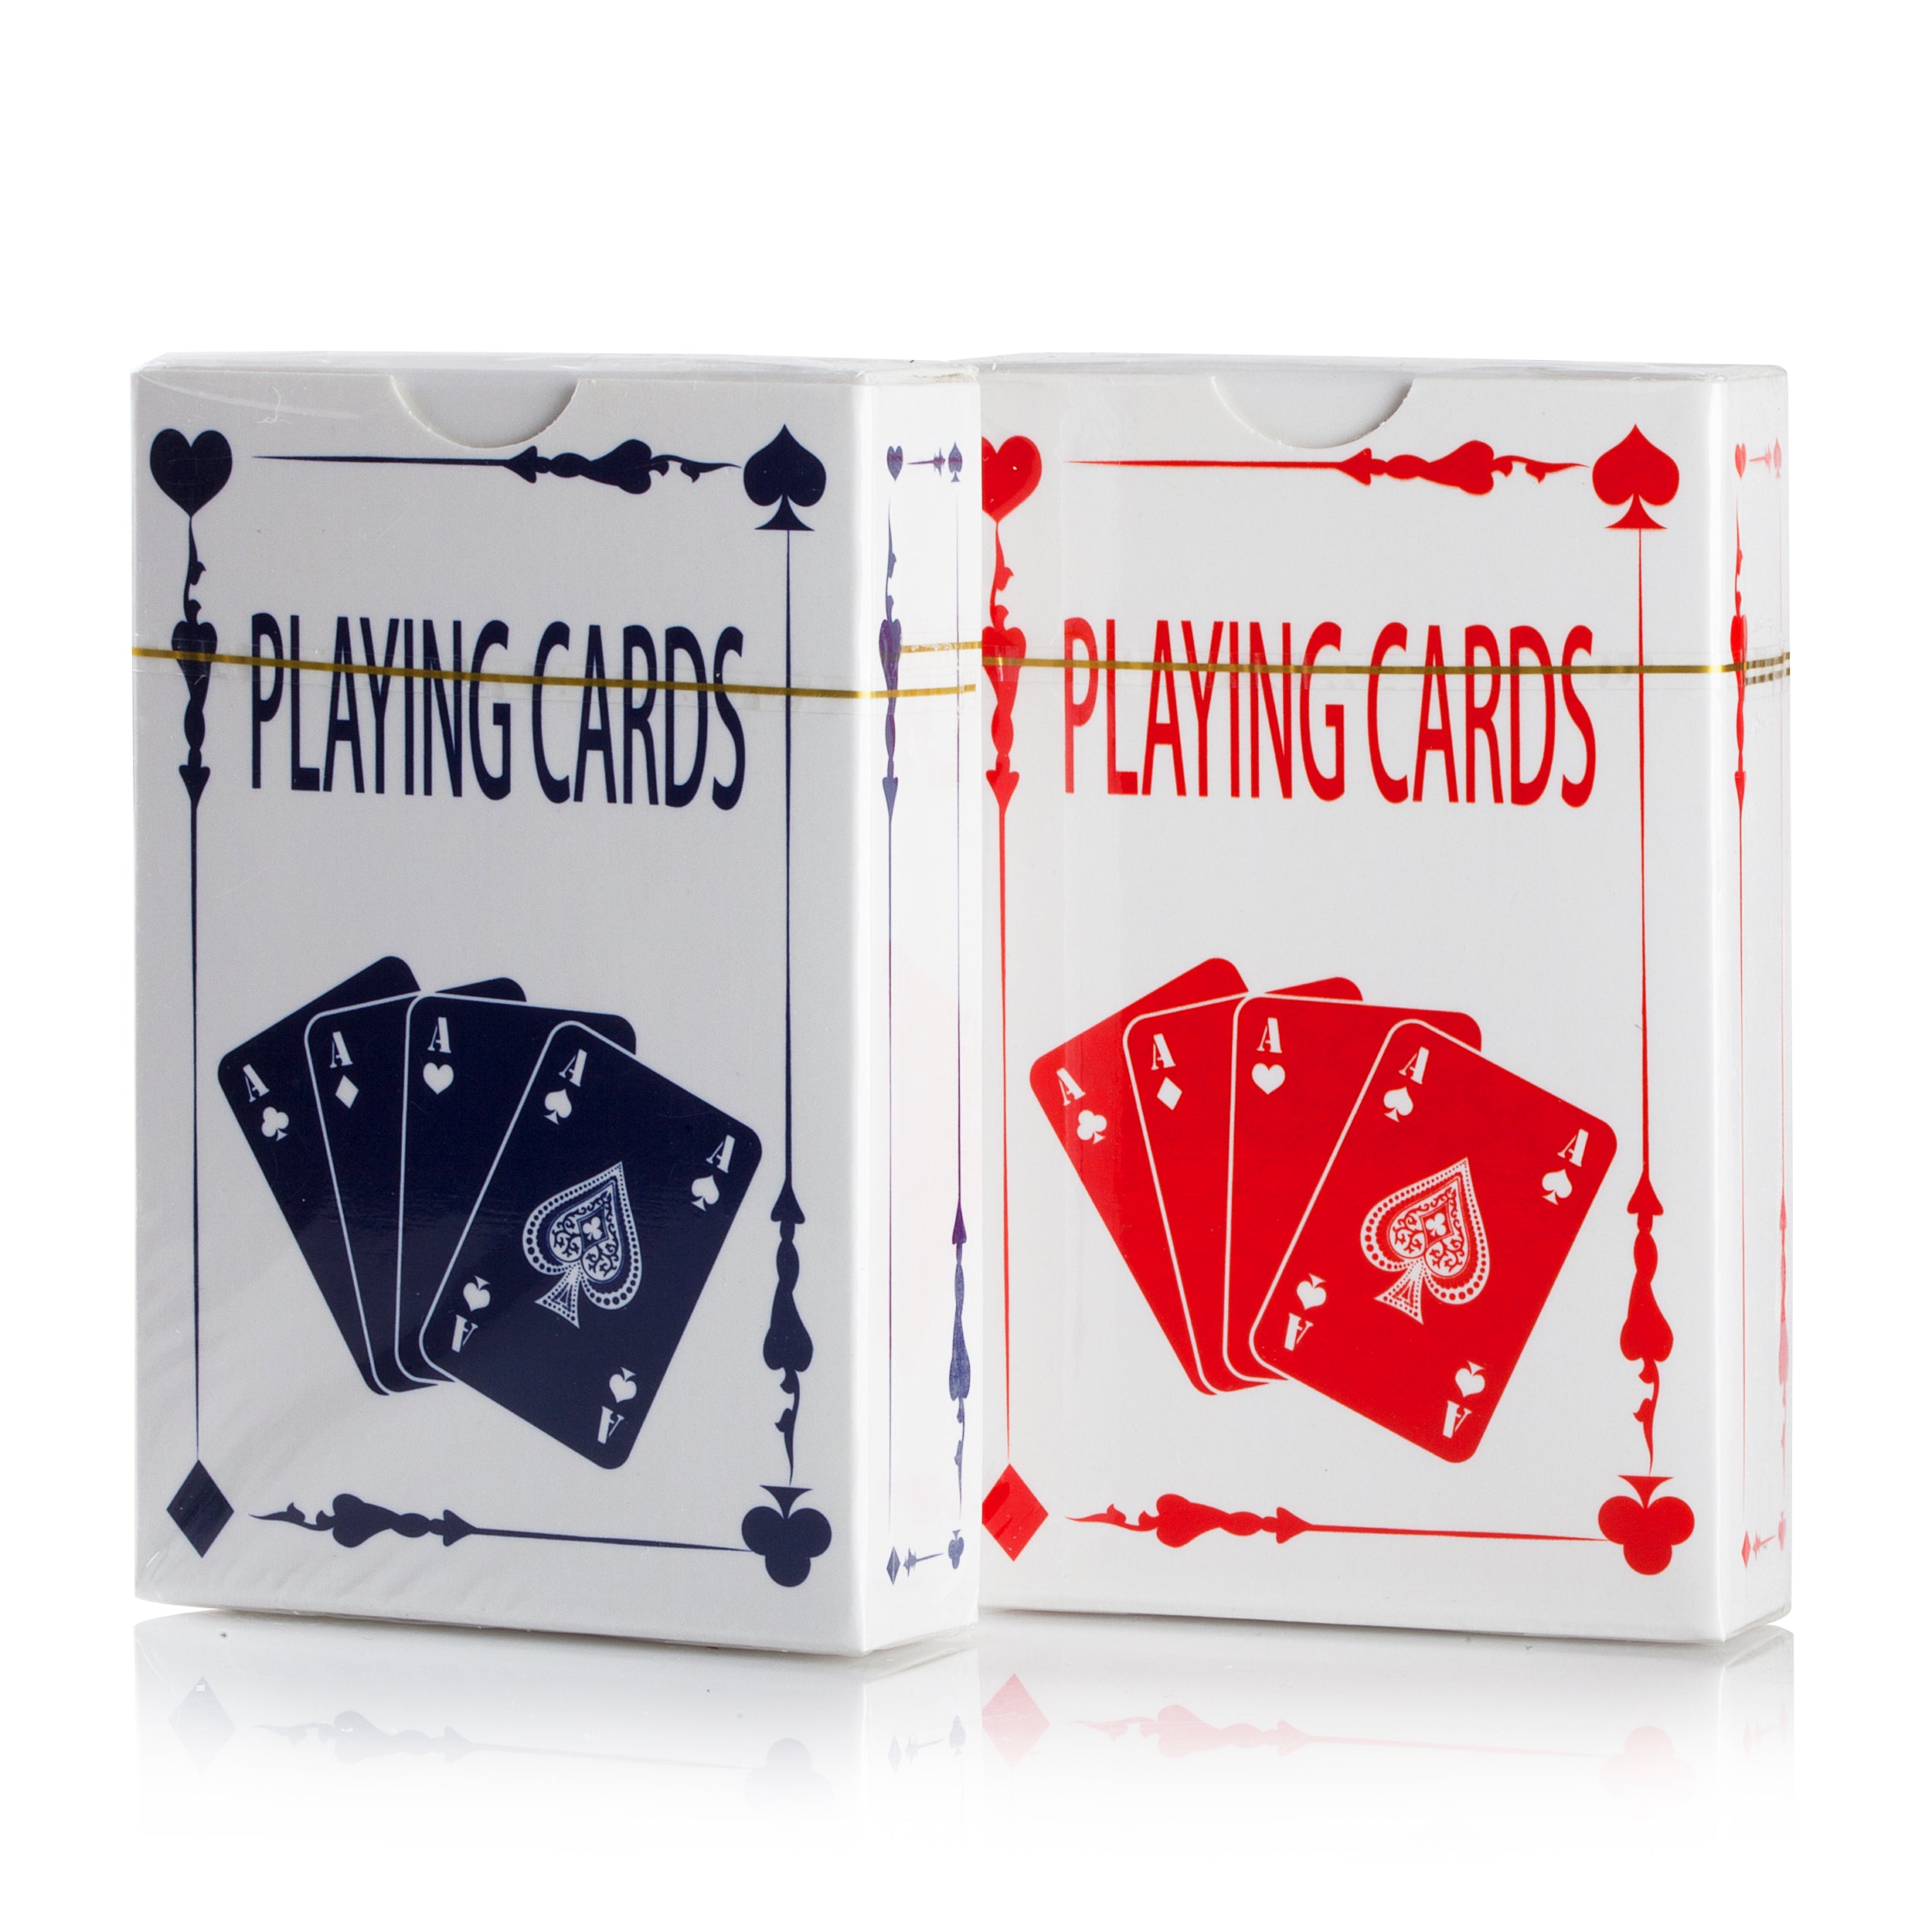 Playing Cards - Standard 52 Card Deck (10 Pack)